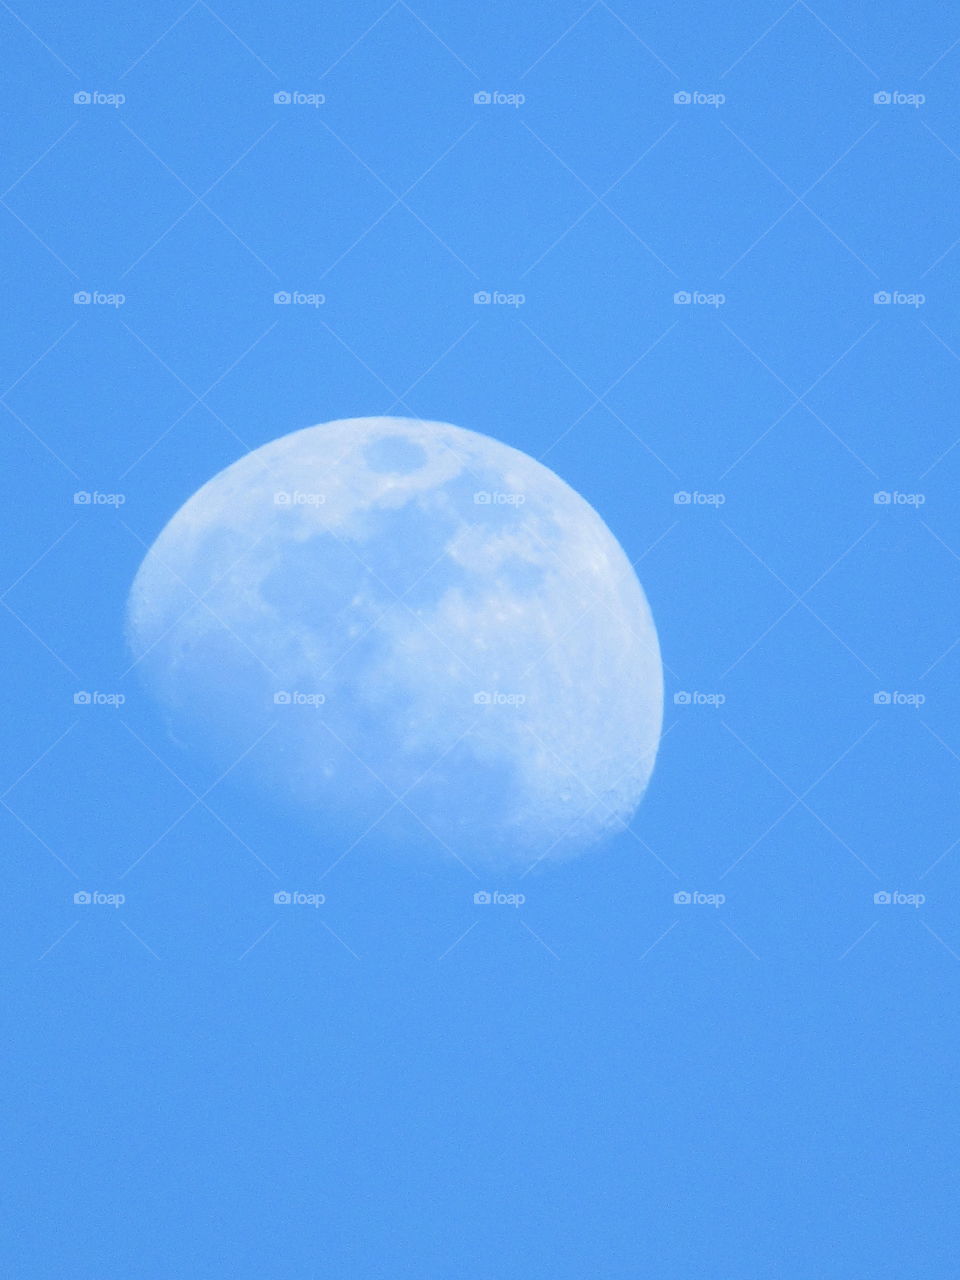 Moon during the day